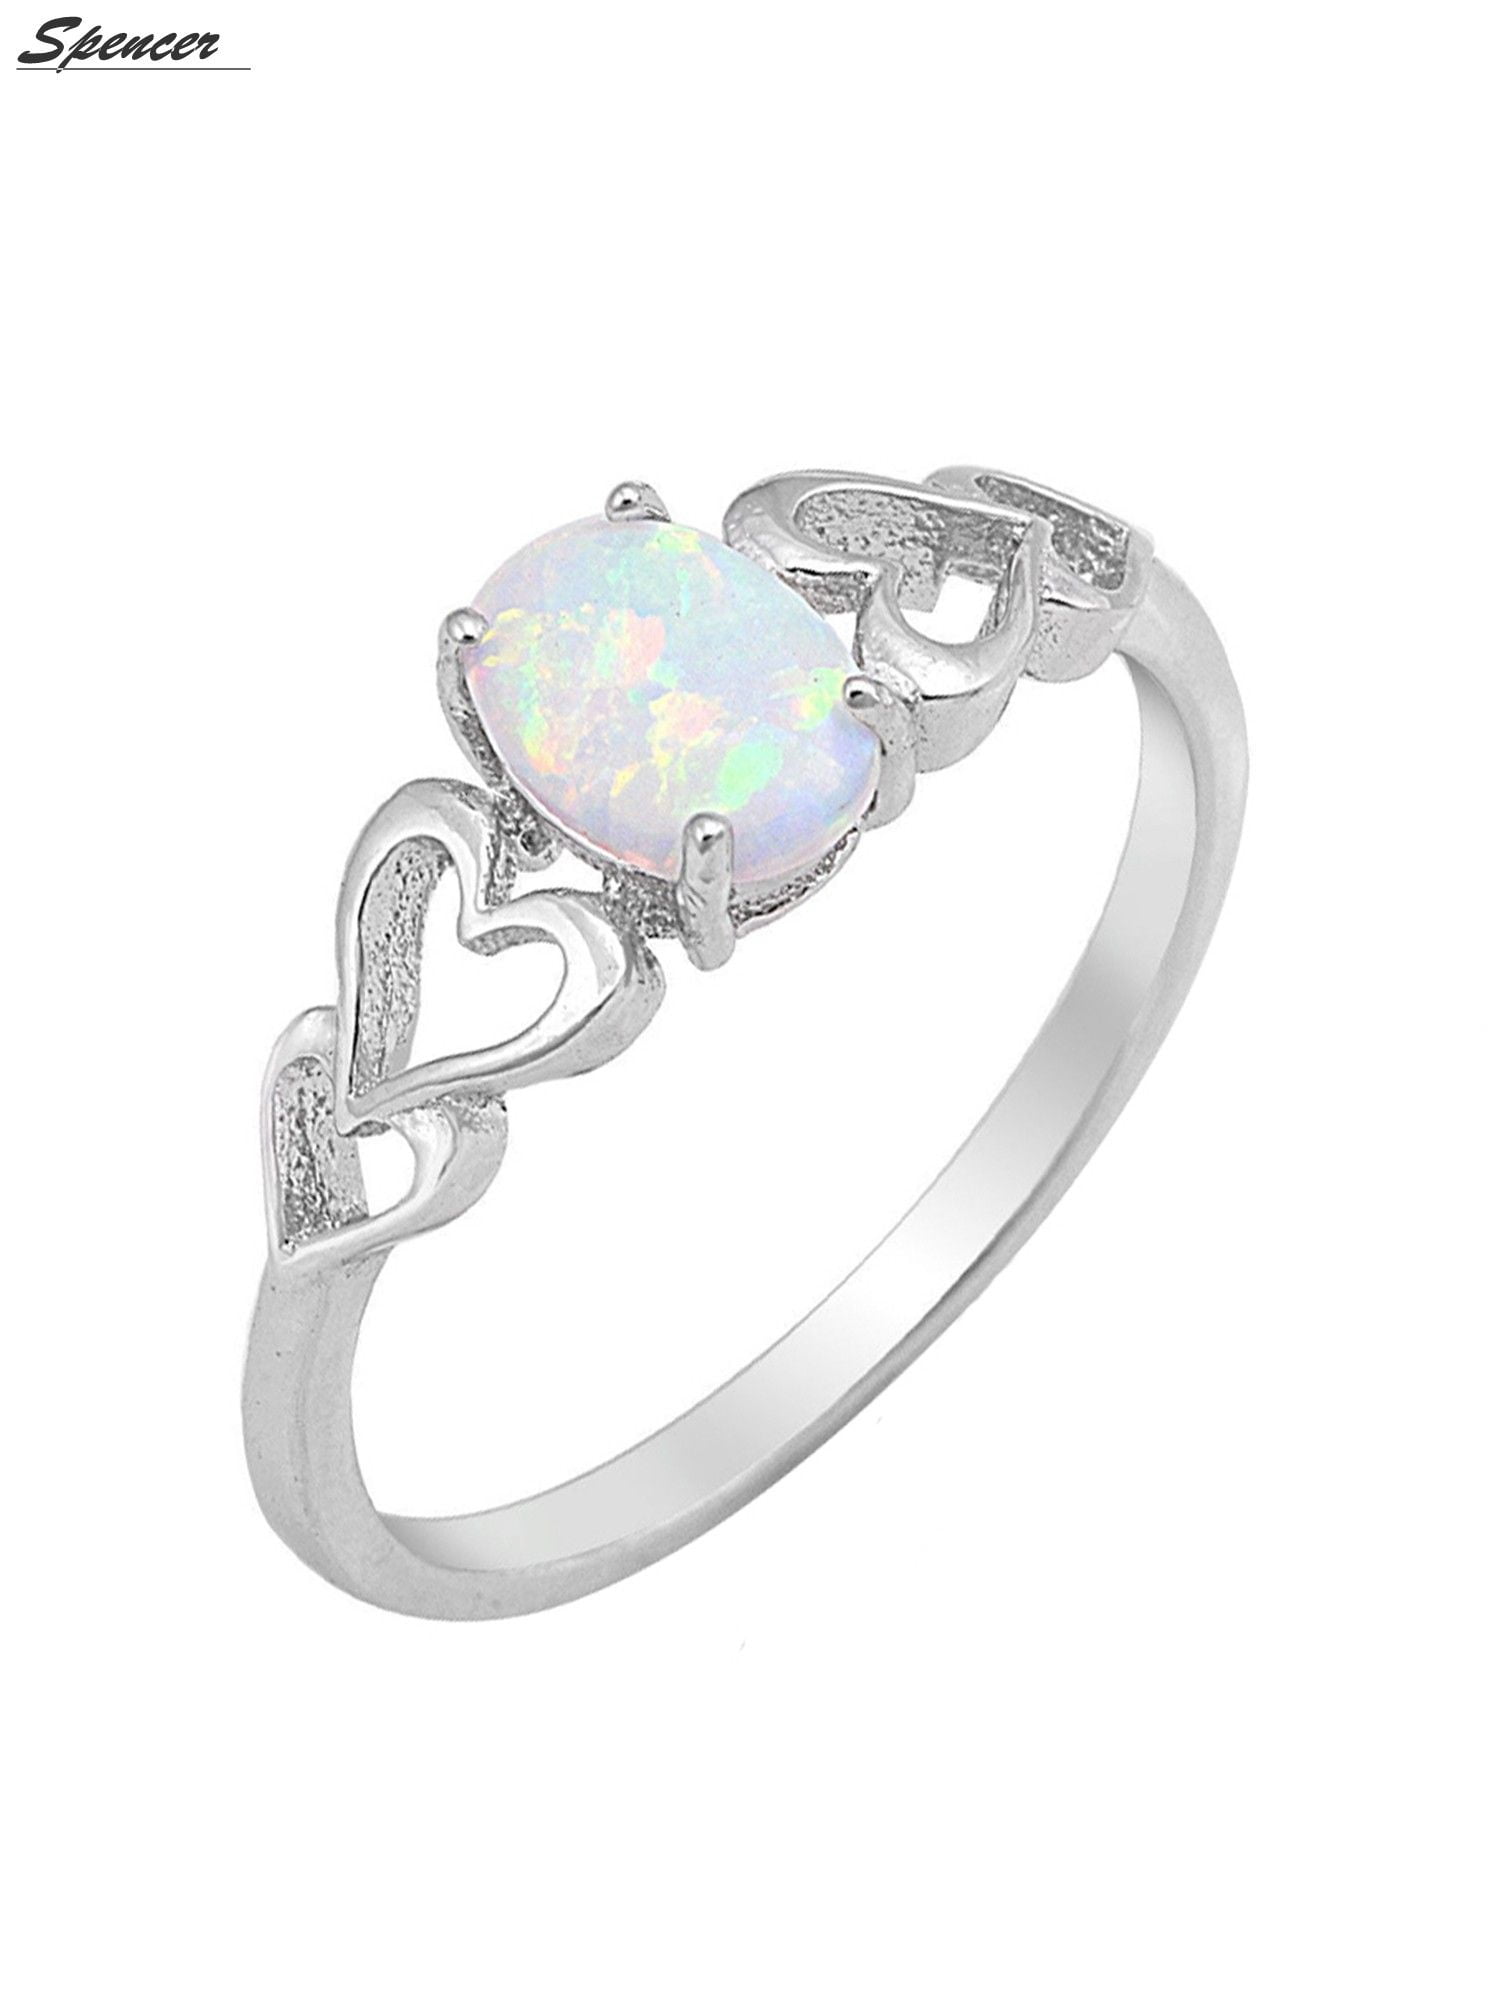 Reversible Blue & White Fire Opal Solid 925 Sterling Silver Ring size 5-9 